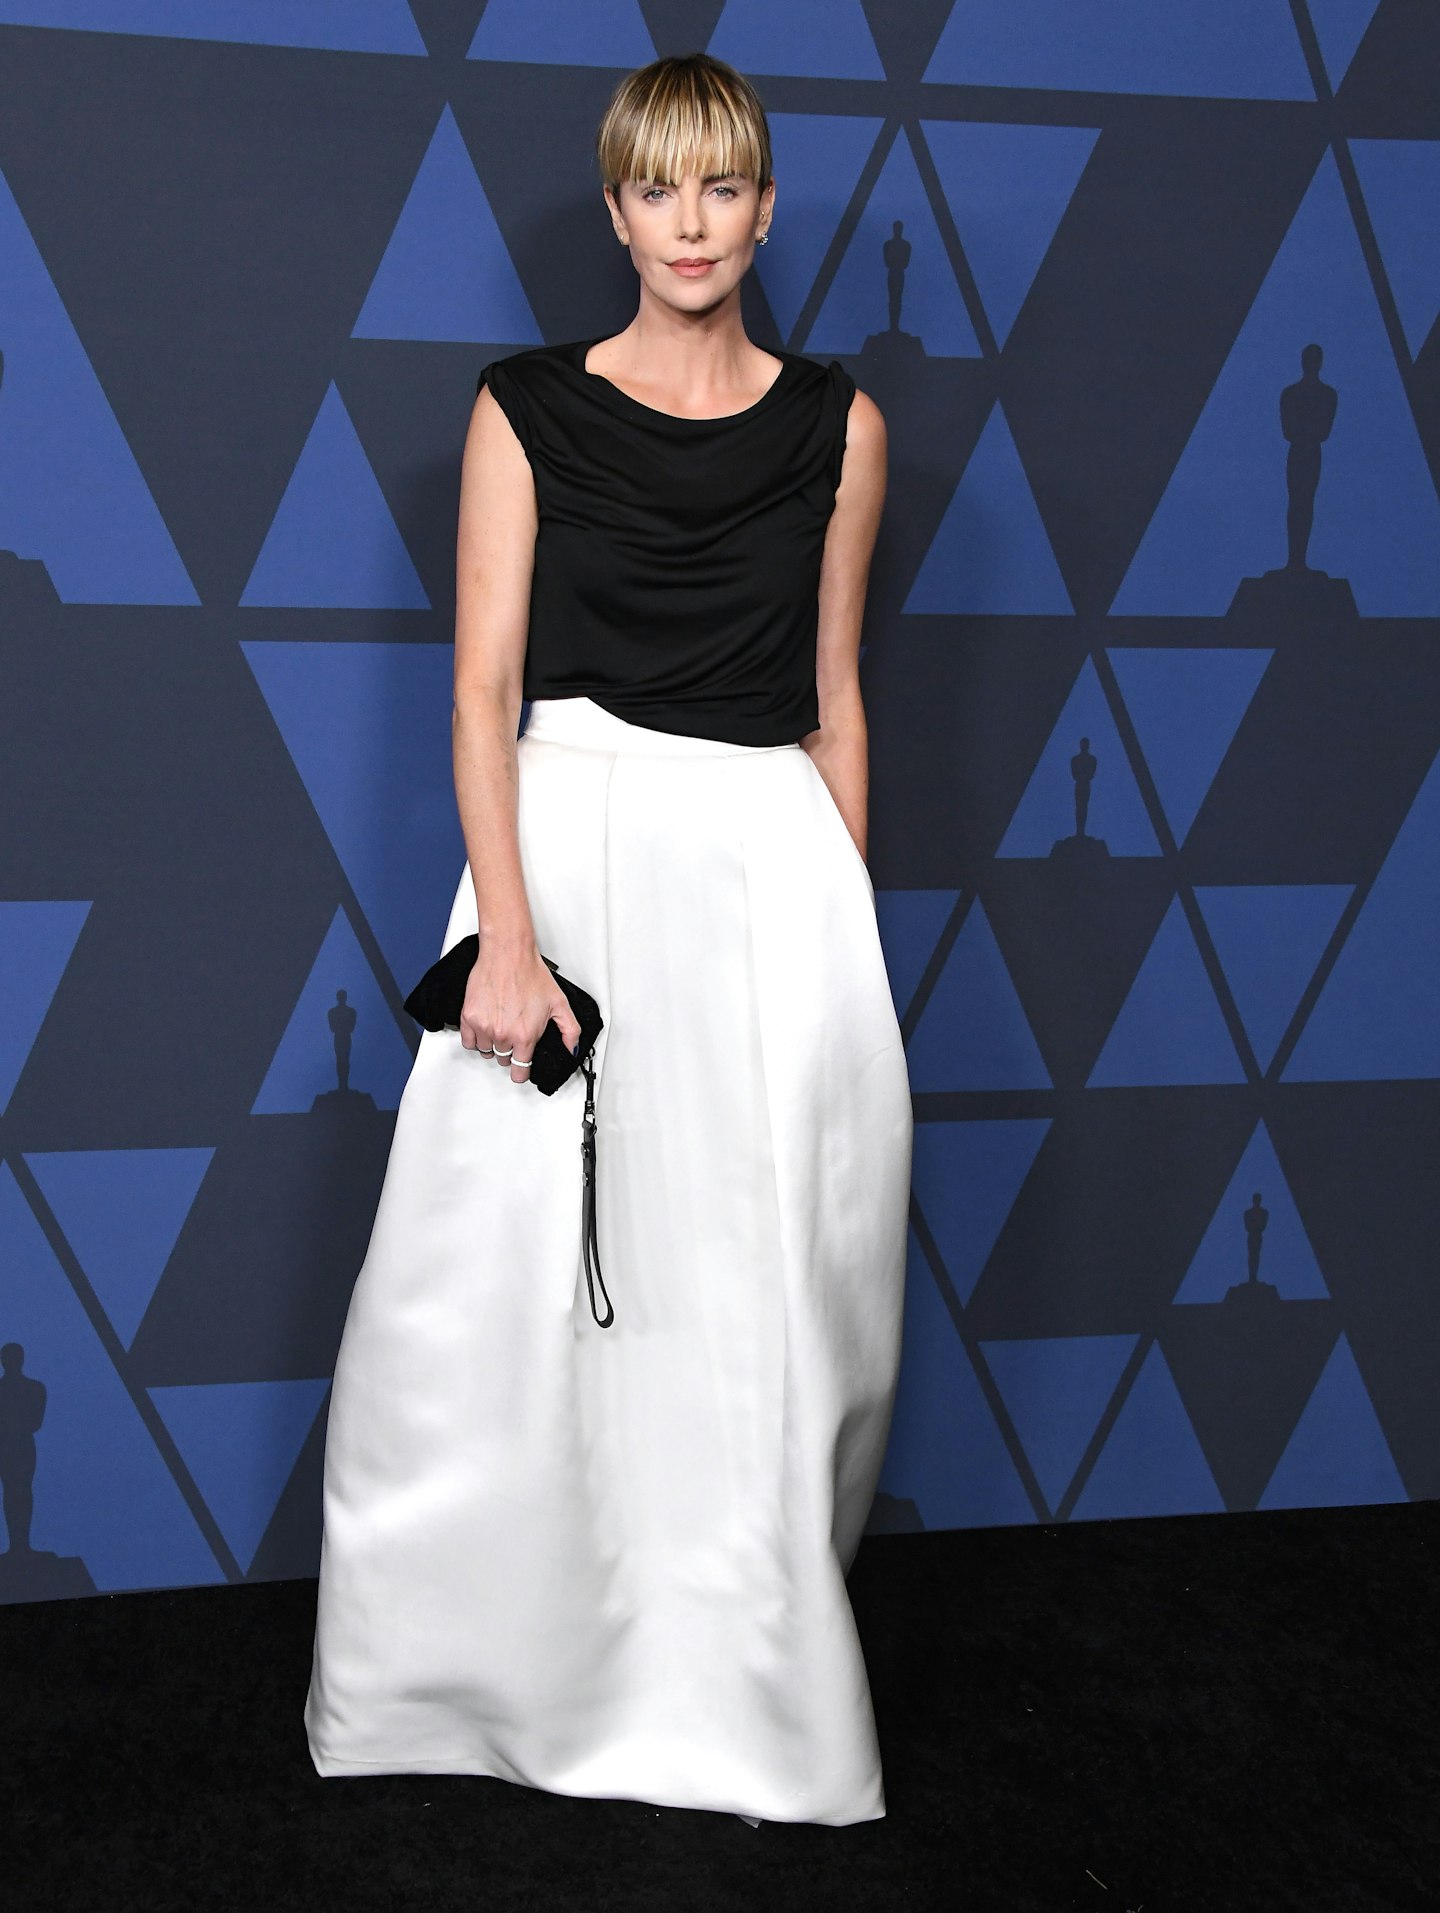 Charlize Theron at the Governor's Awards